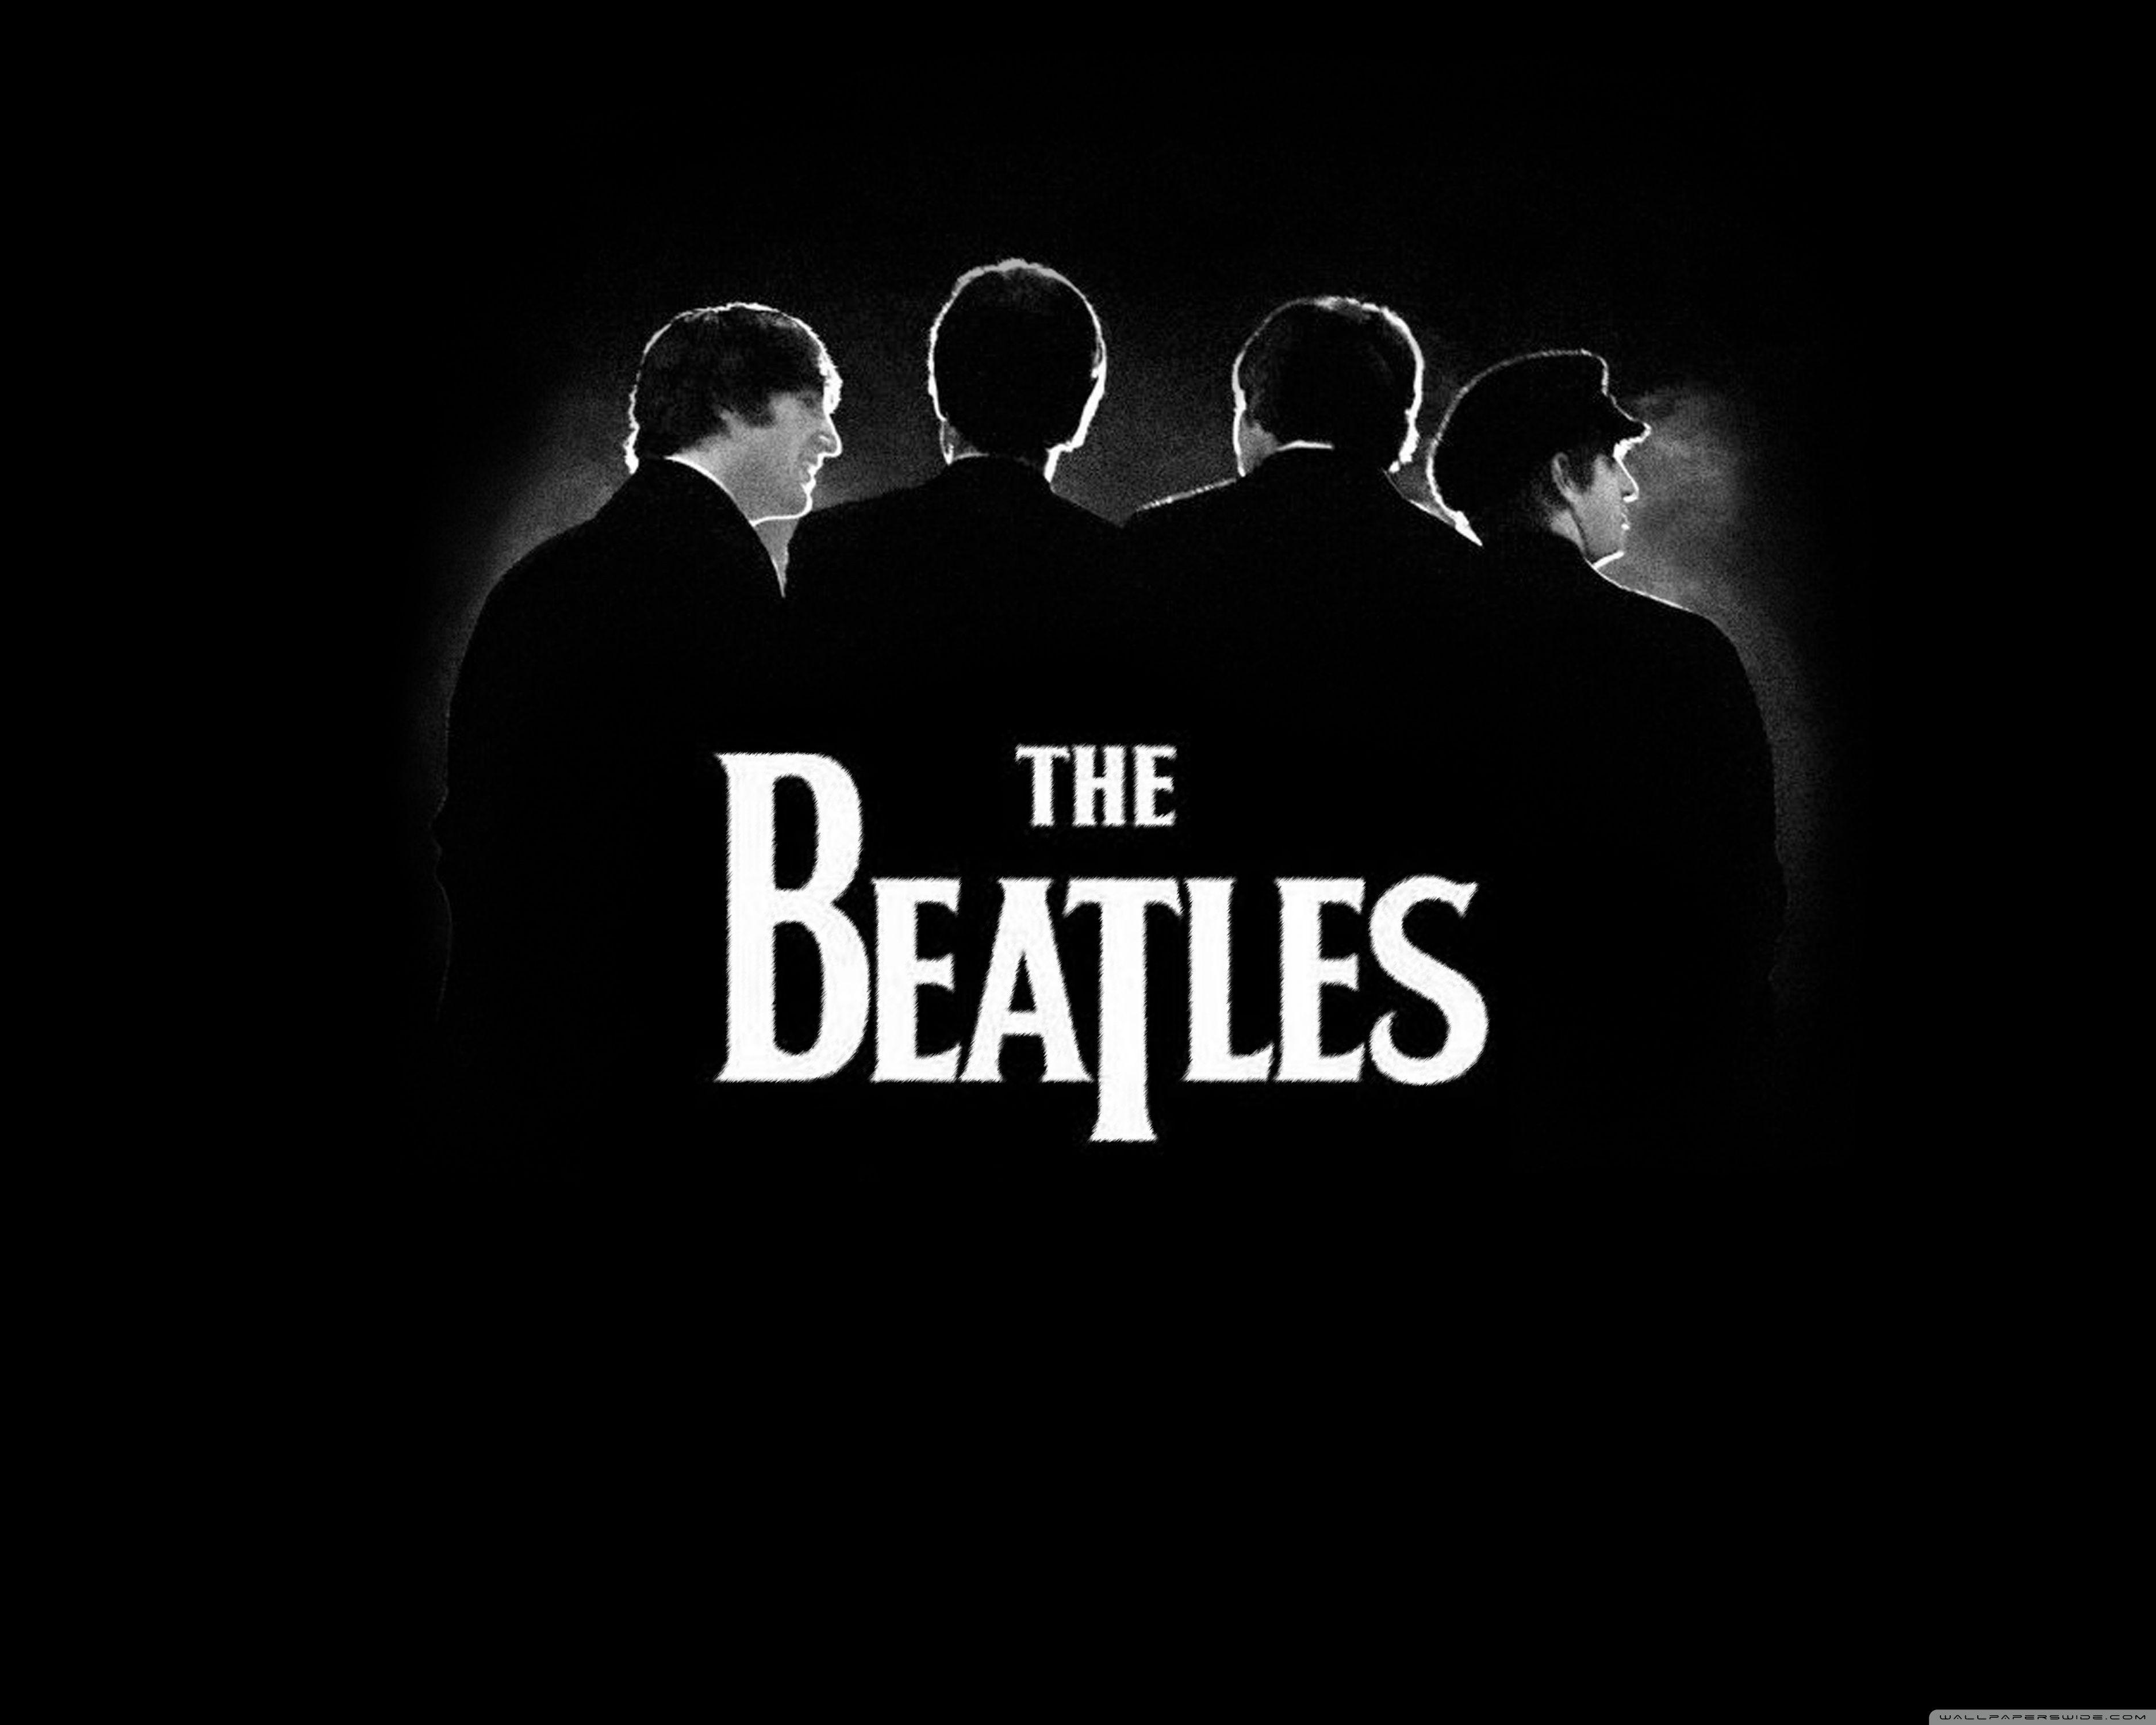 The Beatles Wallpaper Free The Beatles Background